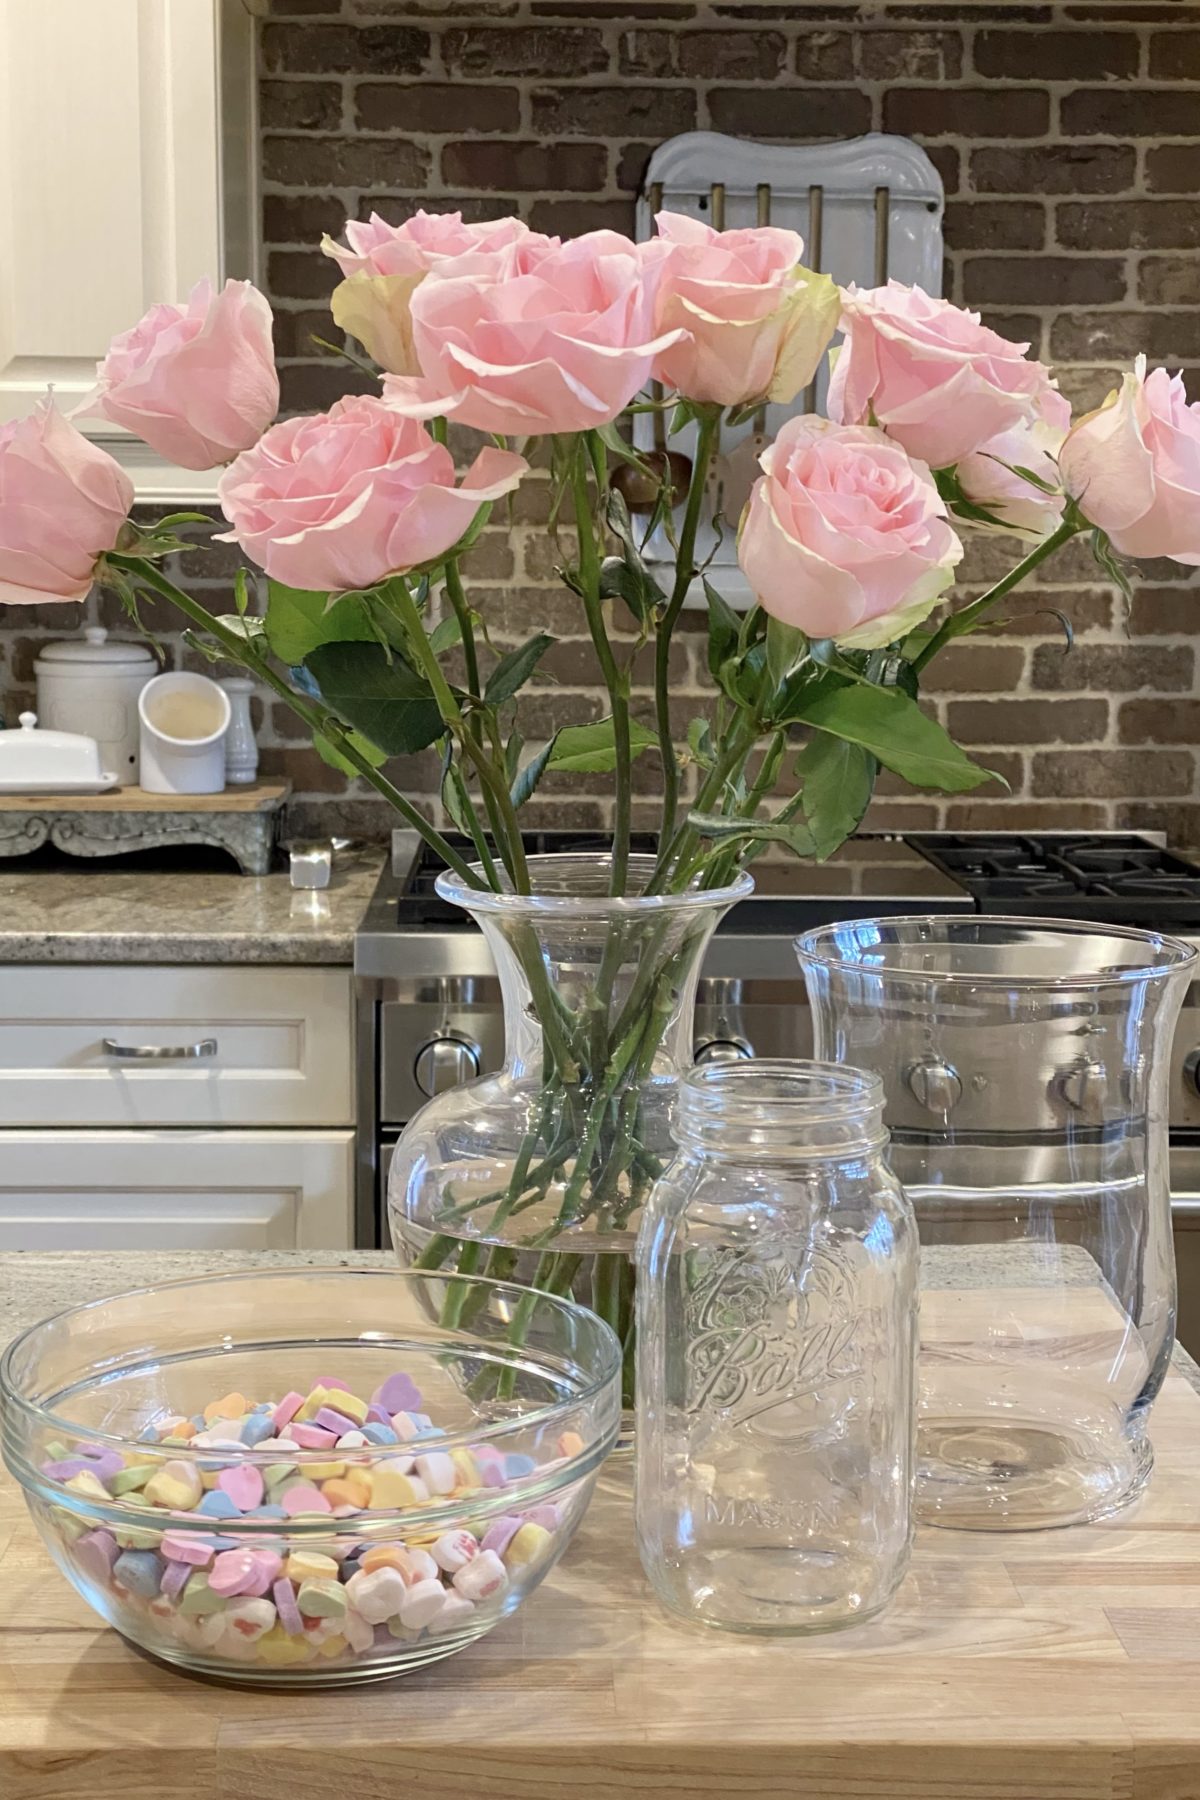 A vase, a large jar, heart candies in a bowl and pink roses for making a sweet Valentine's Day floral arrangement.